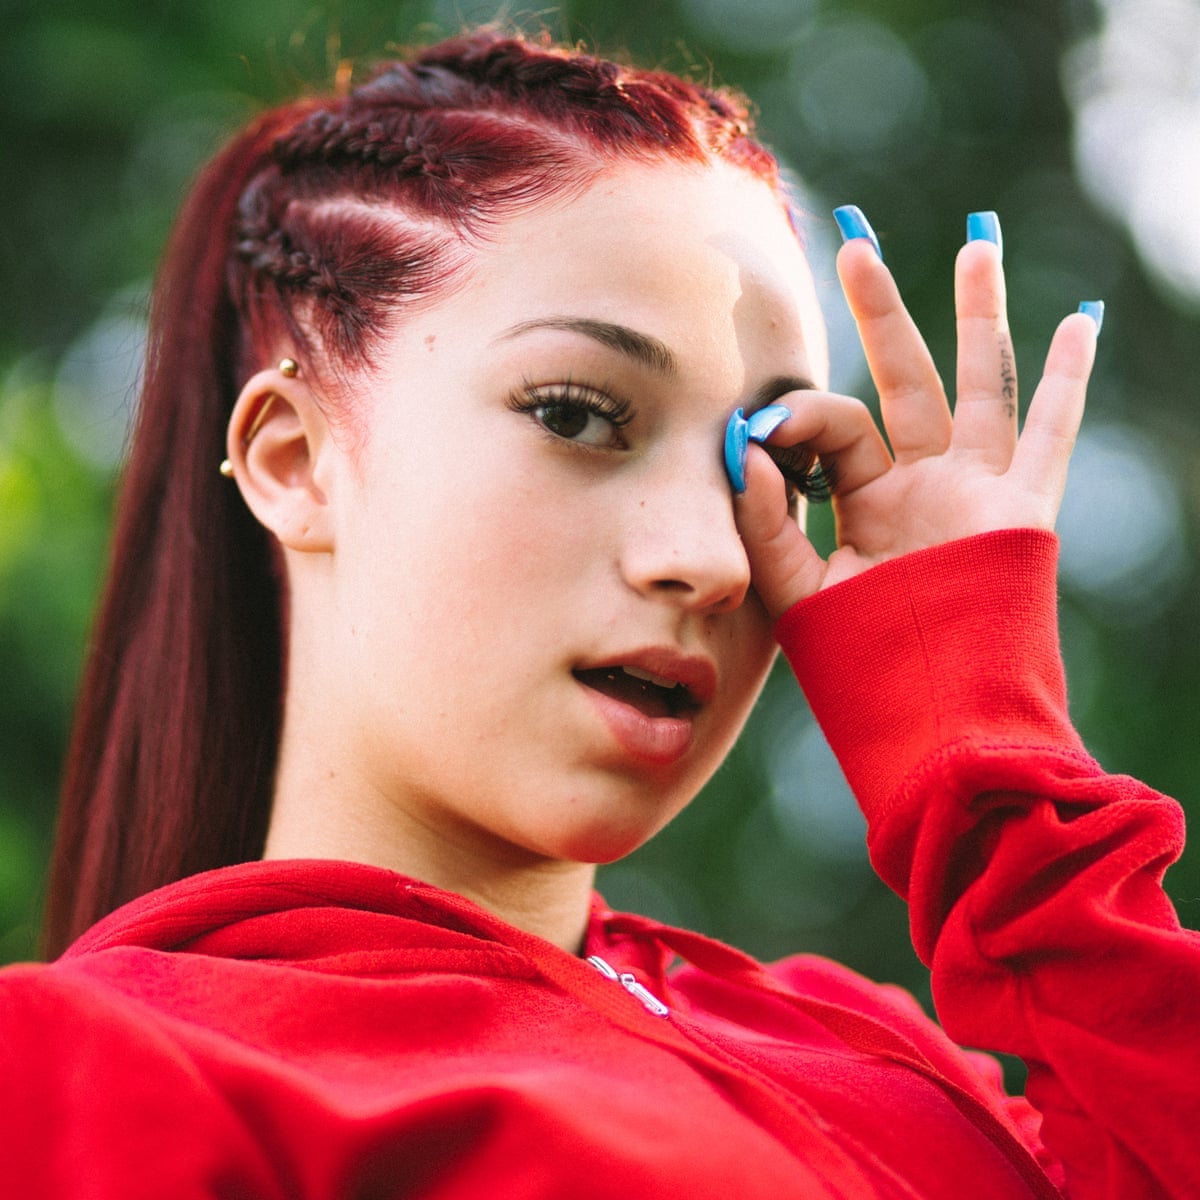 Porn only bhad bhabie fans FULL VIDEO: